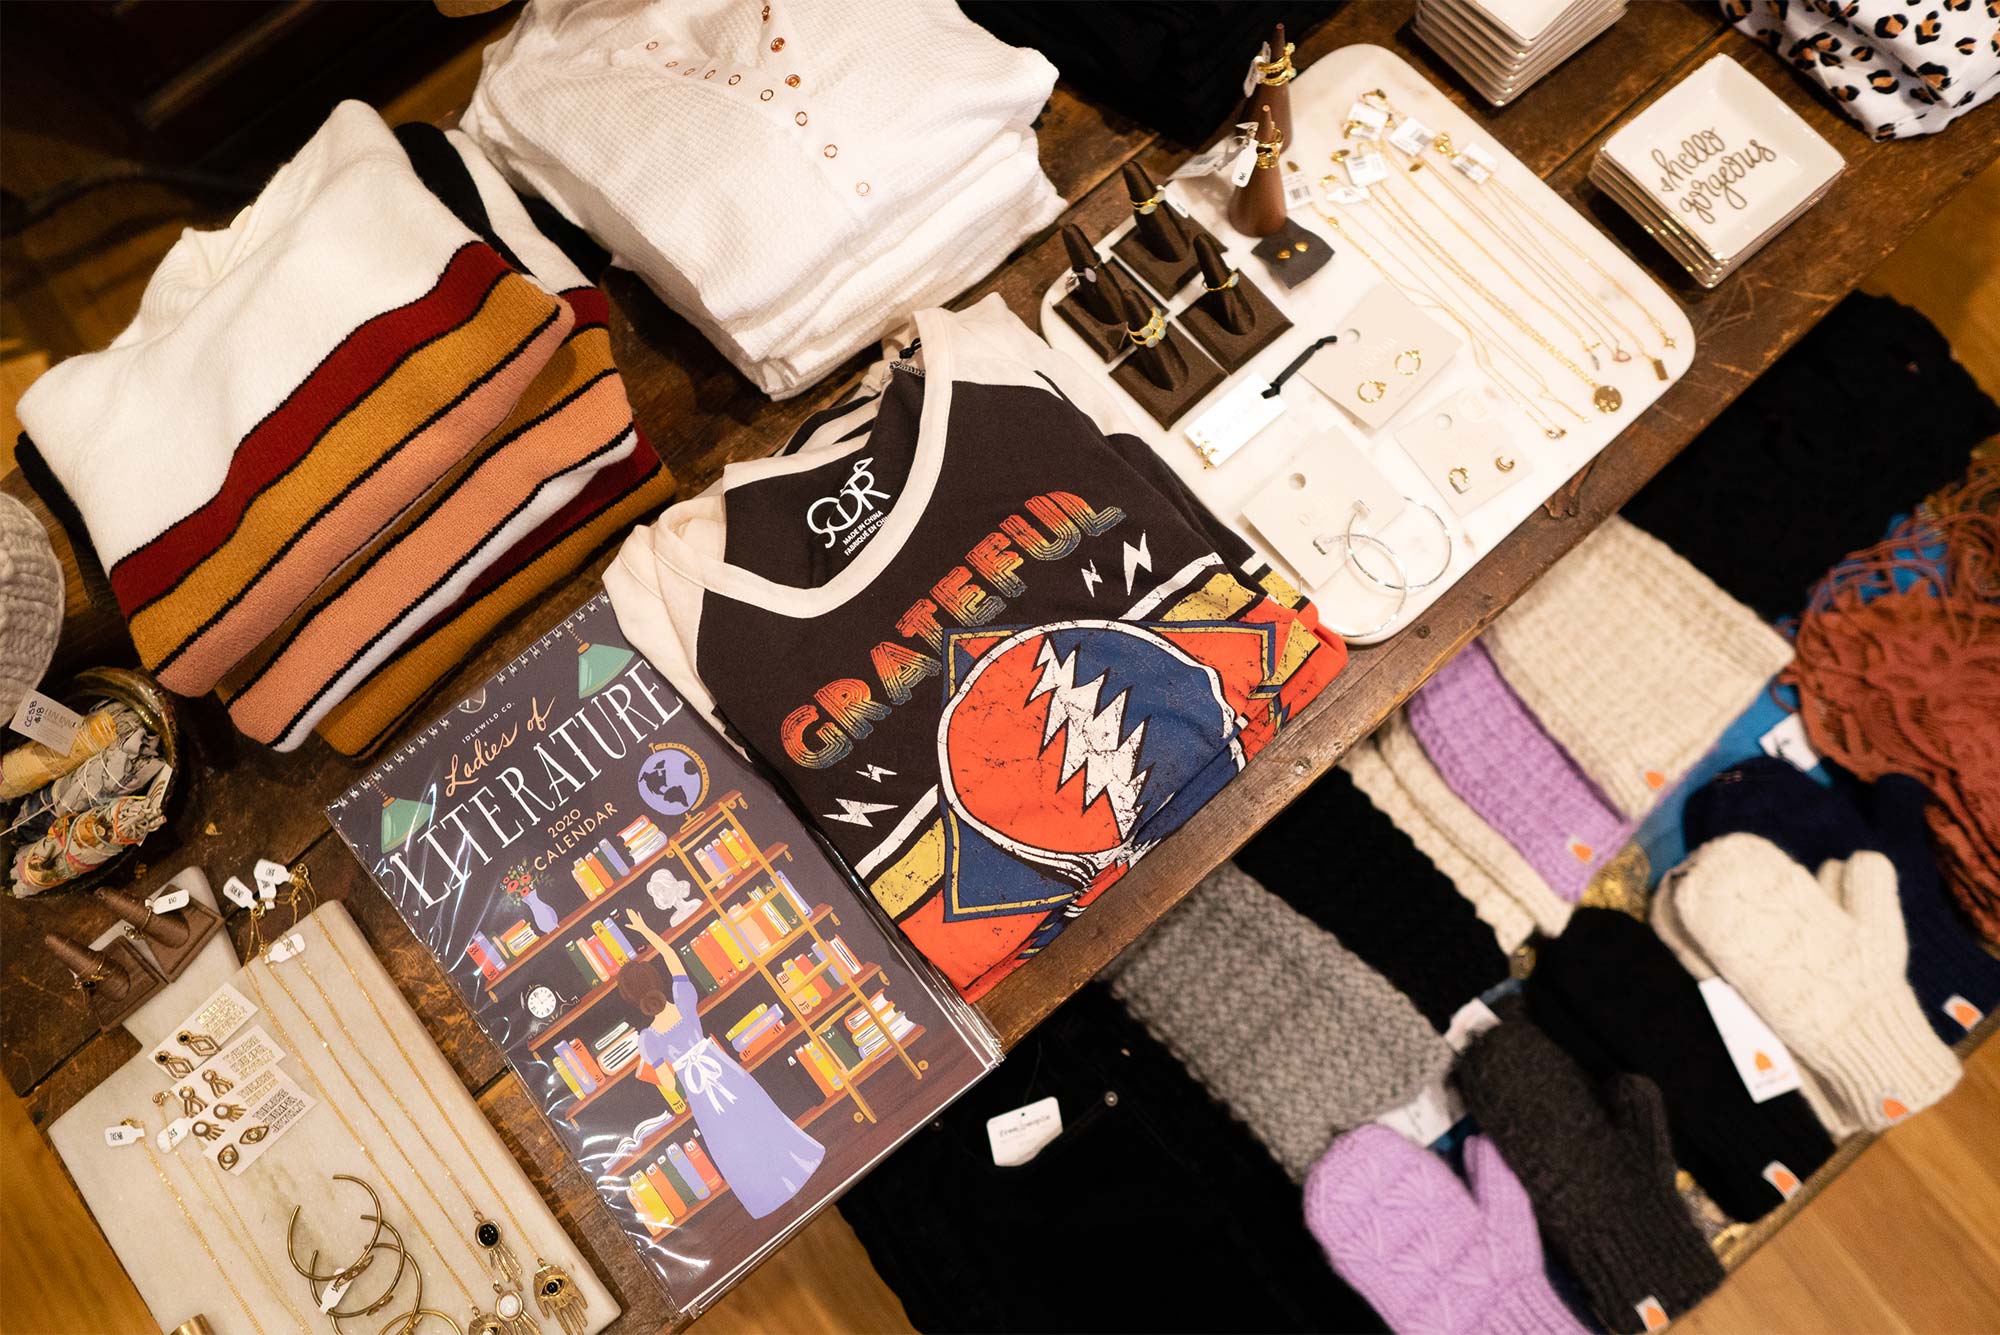 Products, including jewelry and shirts, are displayed on a table in the store Flock located in Boston's South End neighborhood.